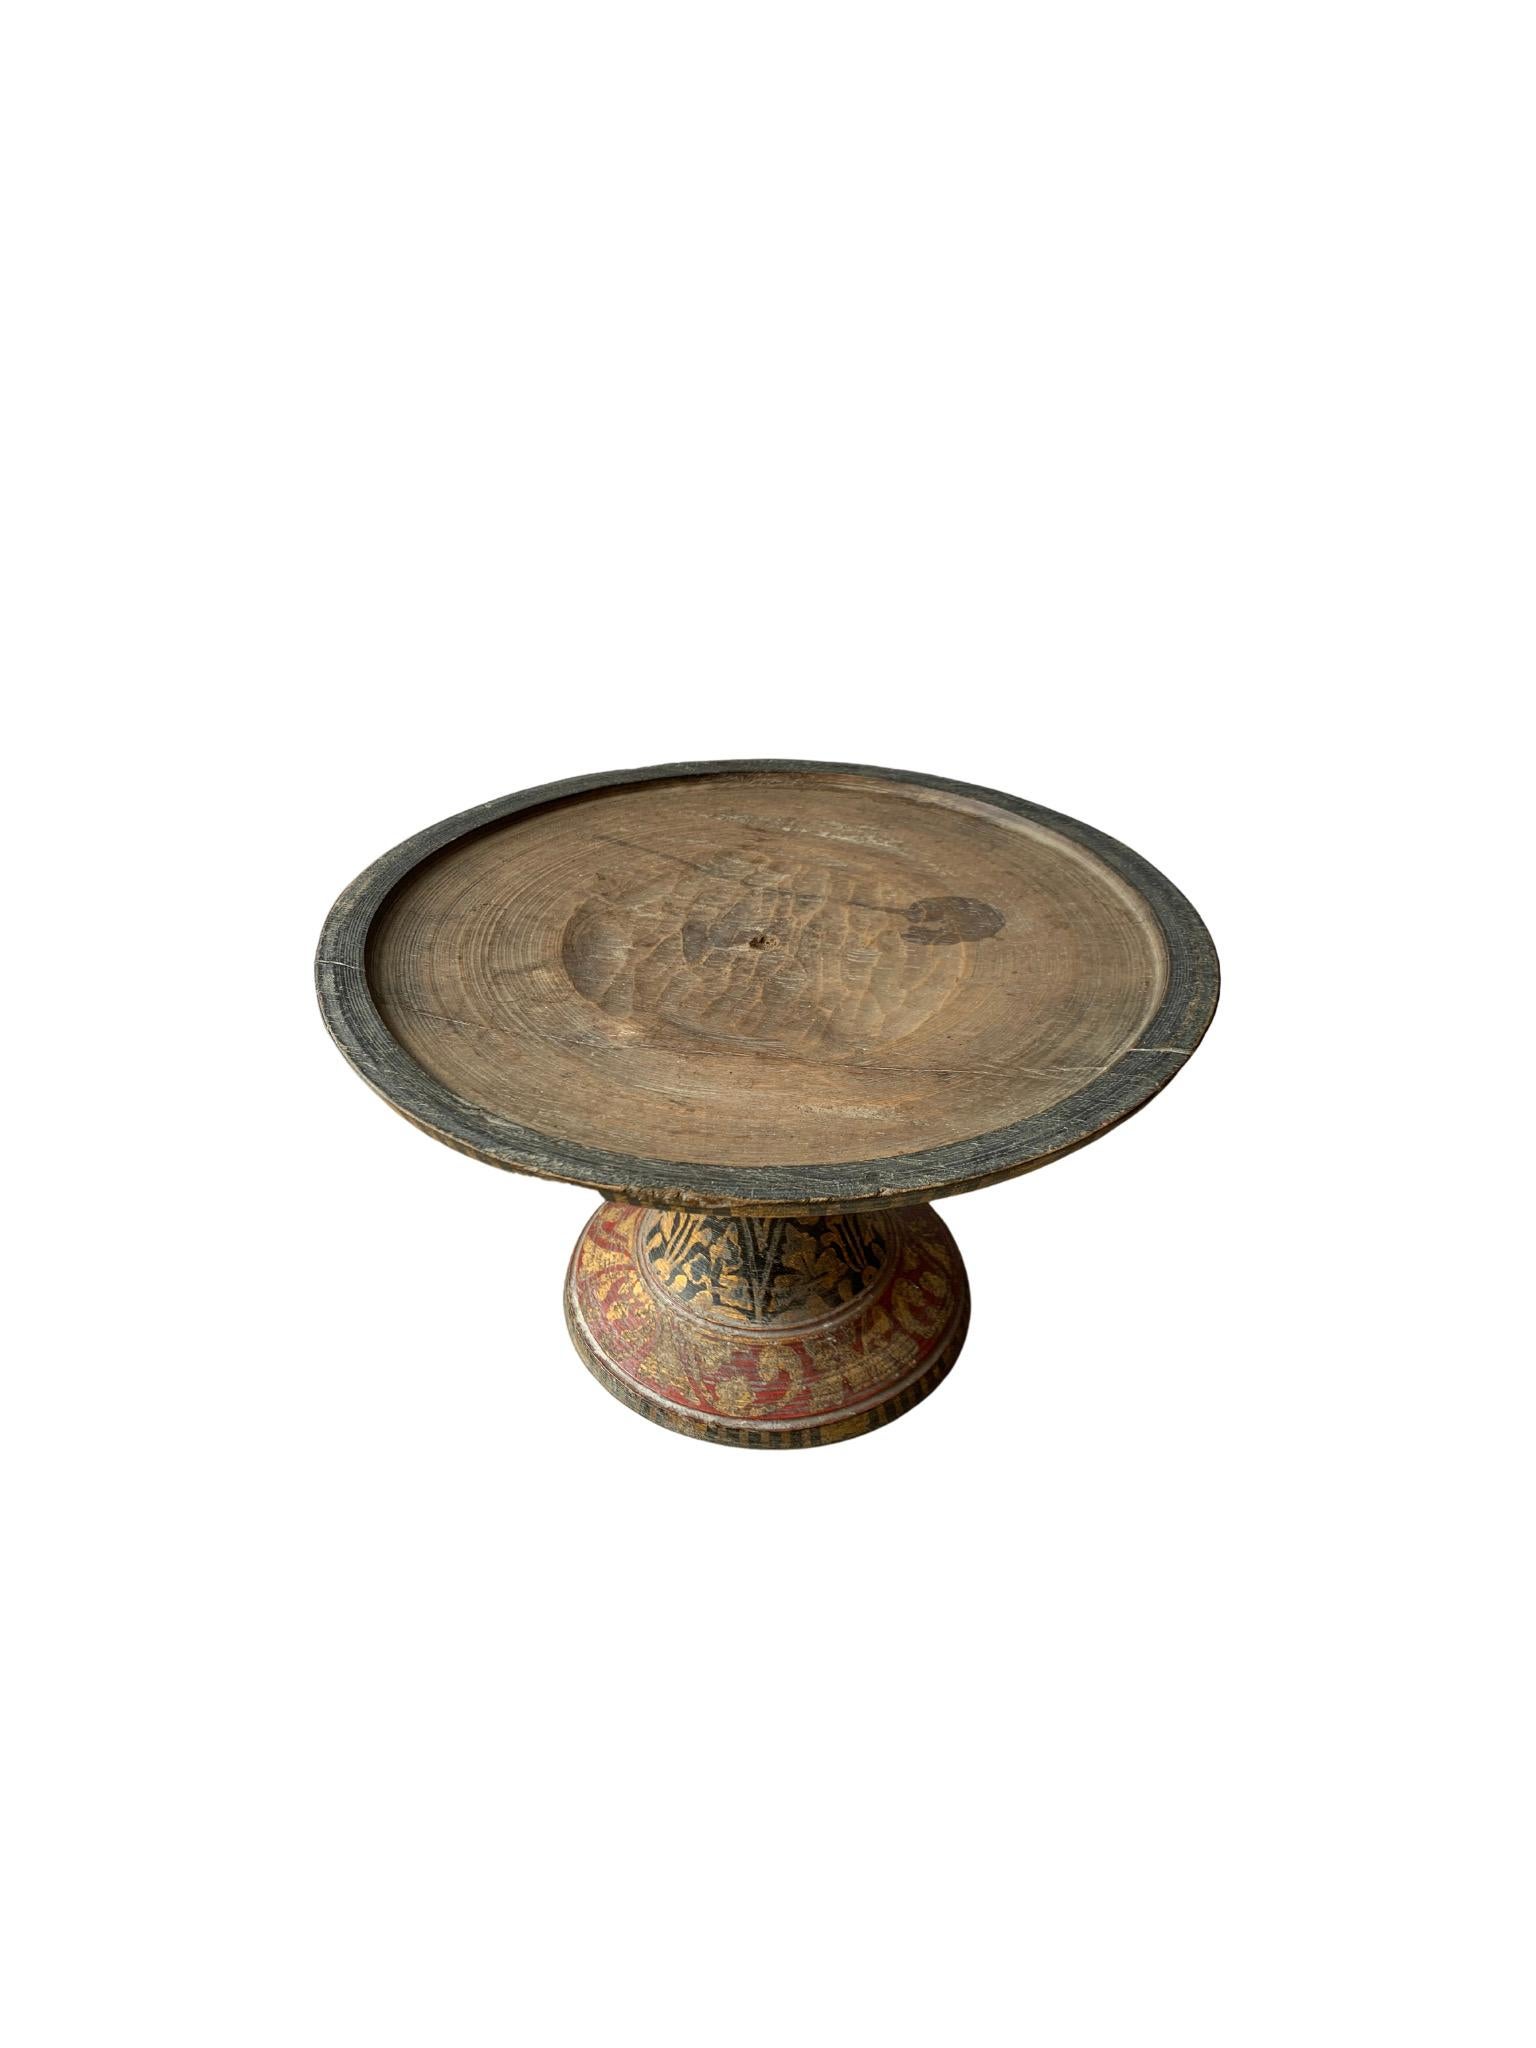 Other Balinese Offering Bowl 'Dulang' with Floral Motif